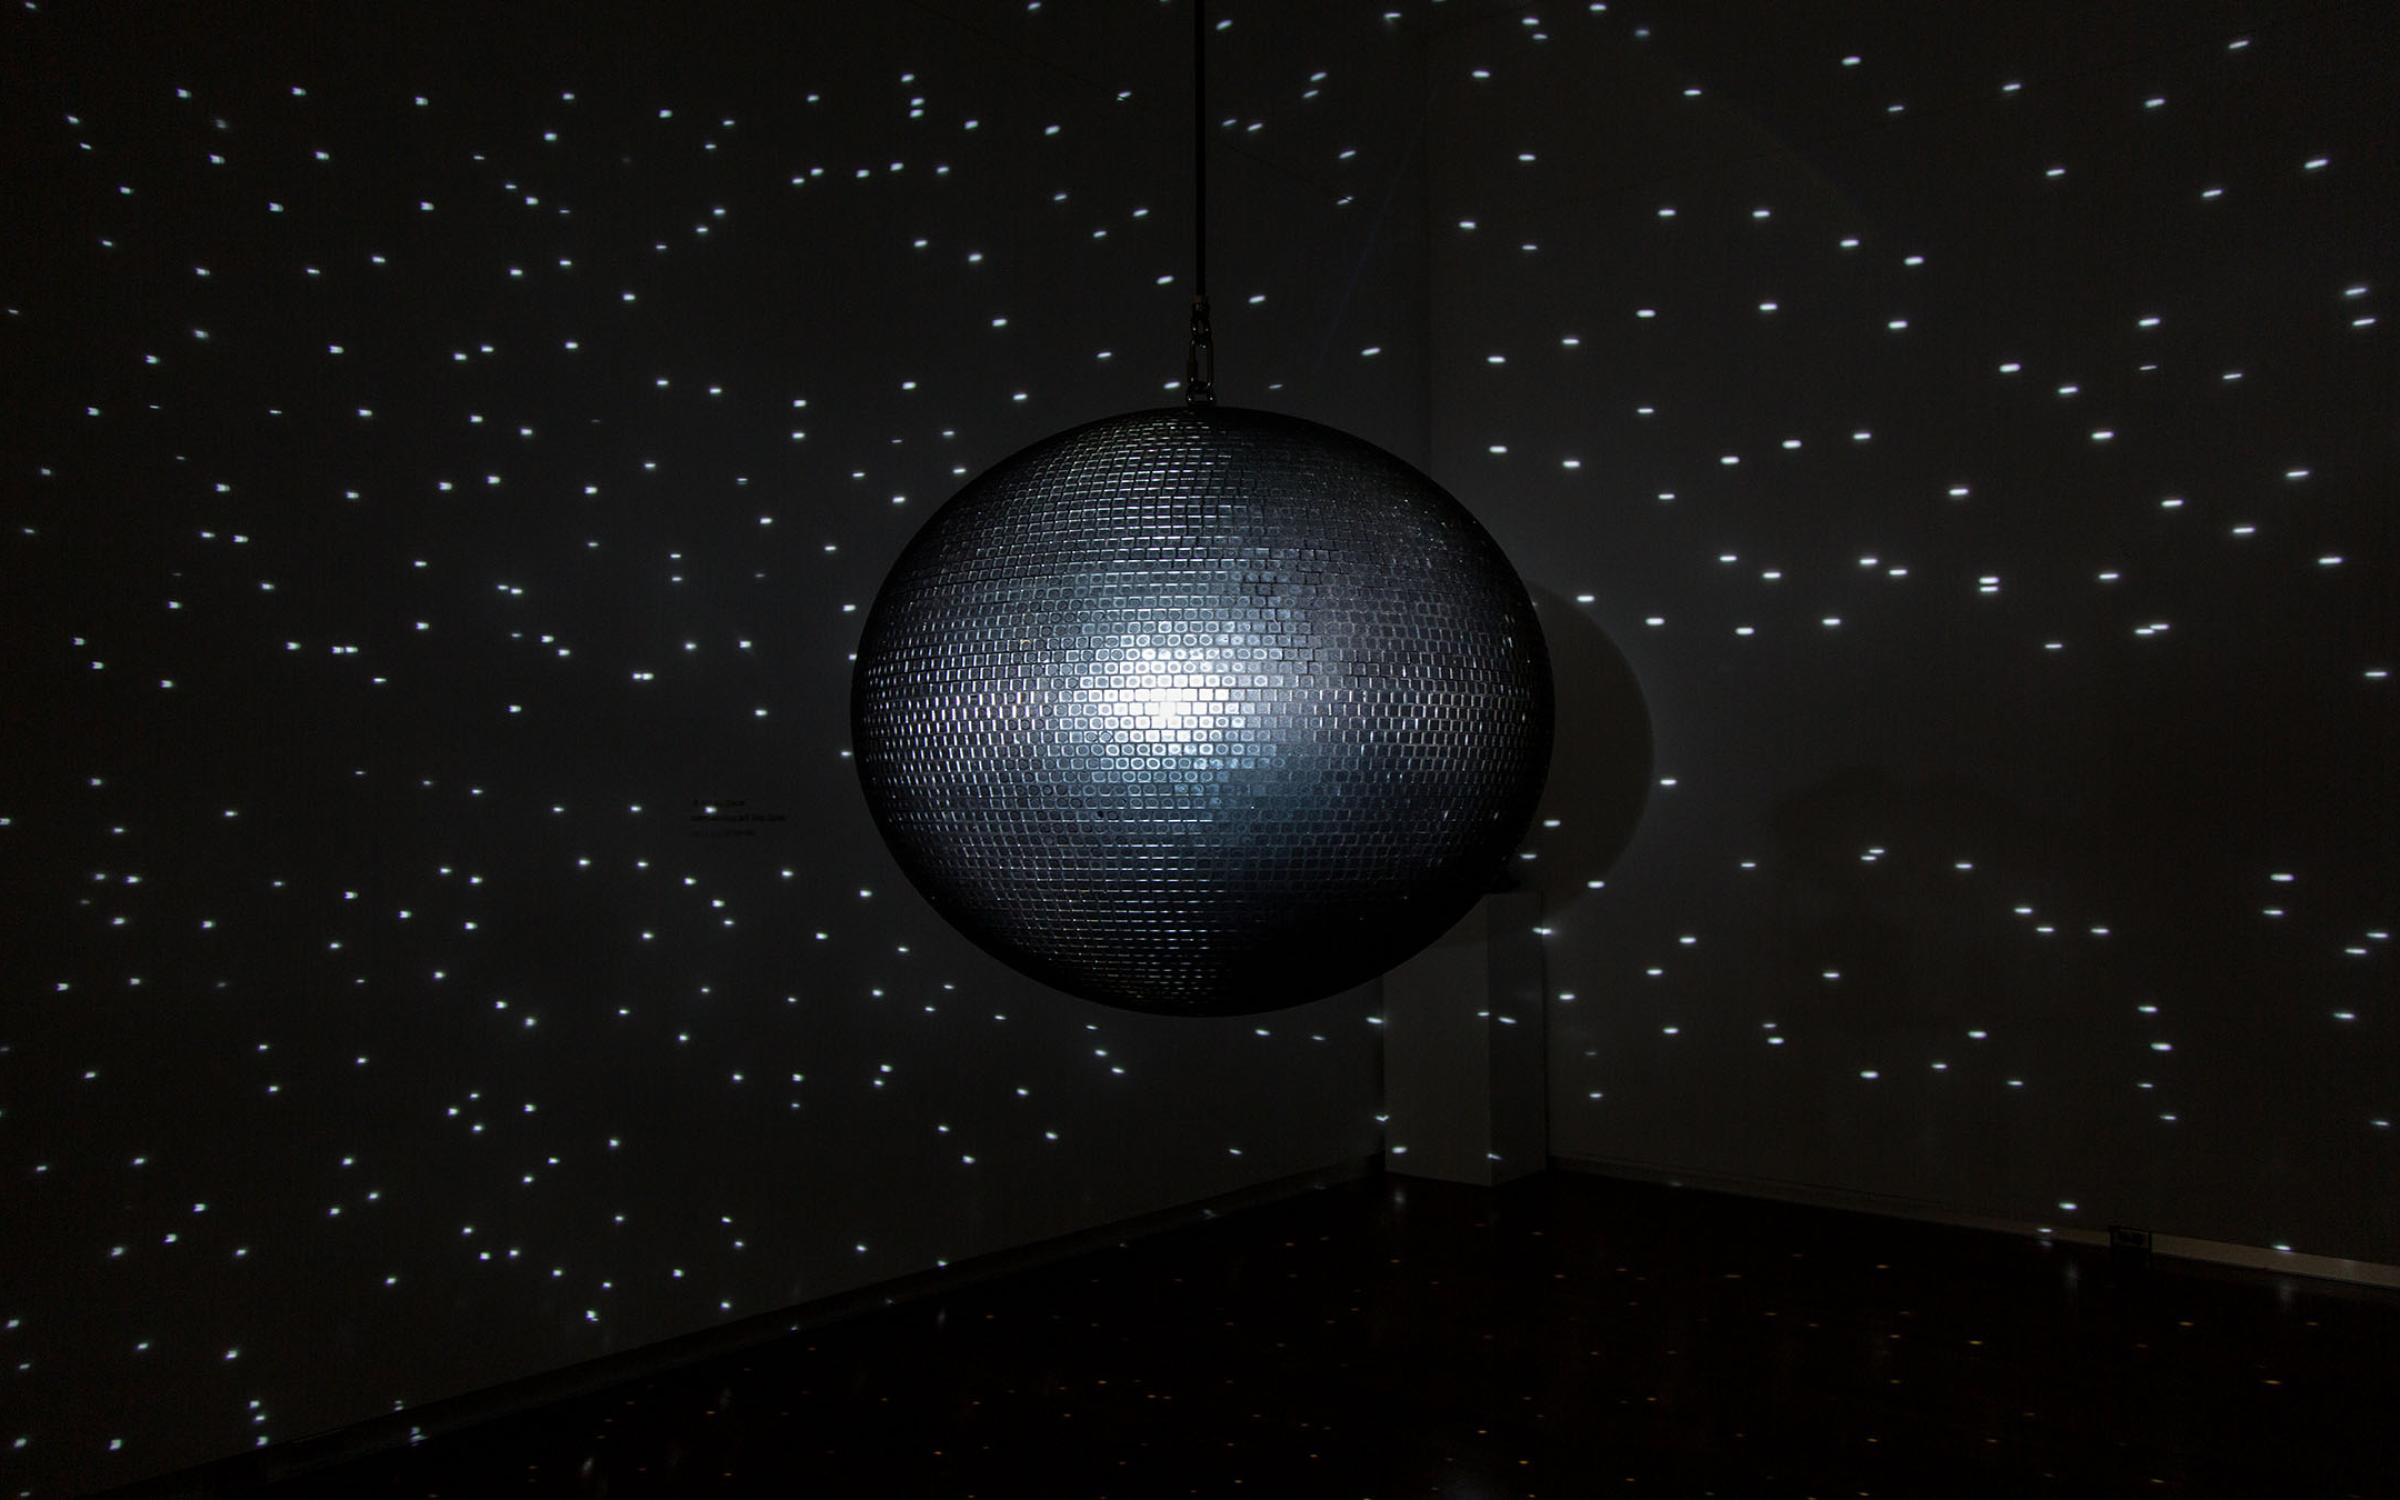 A large, silver disco ball hangs in a dark room, reflecting small dots of bright light on the walls.